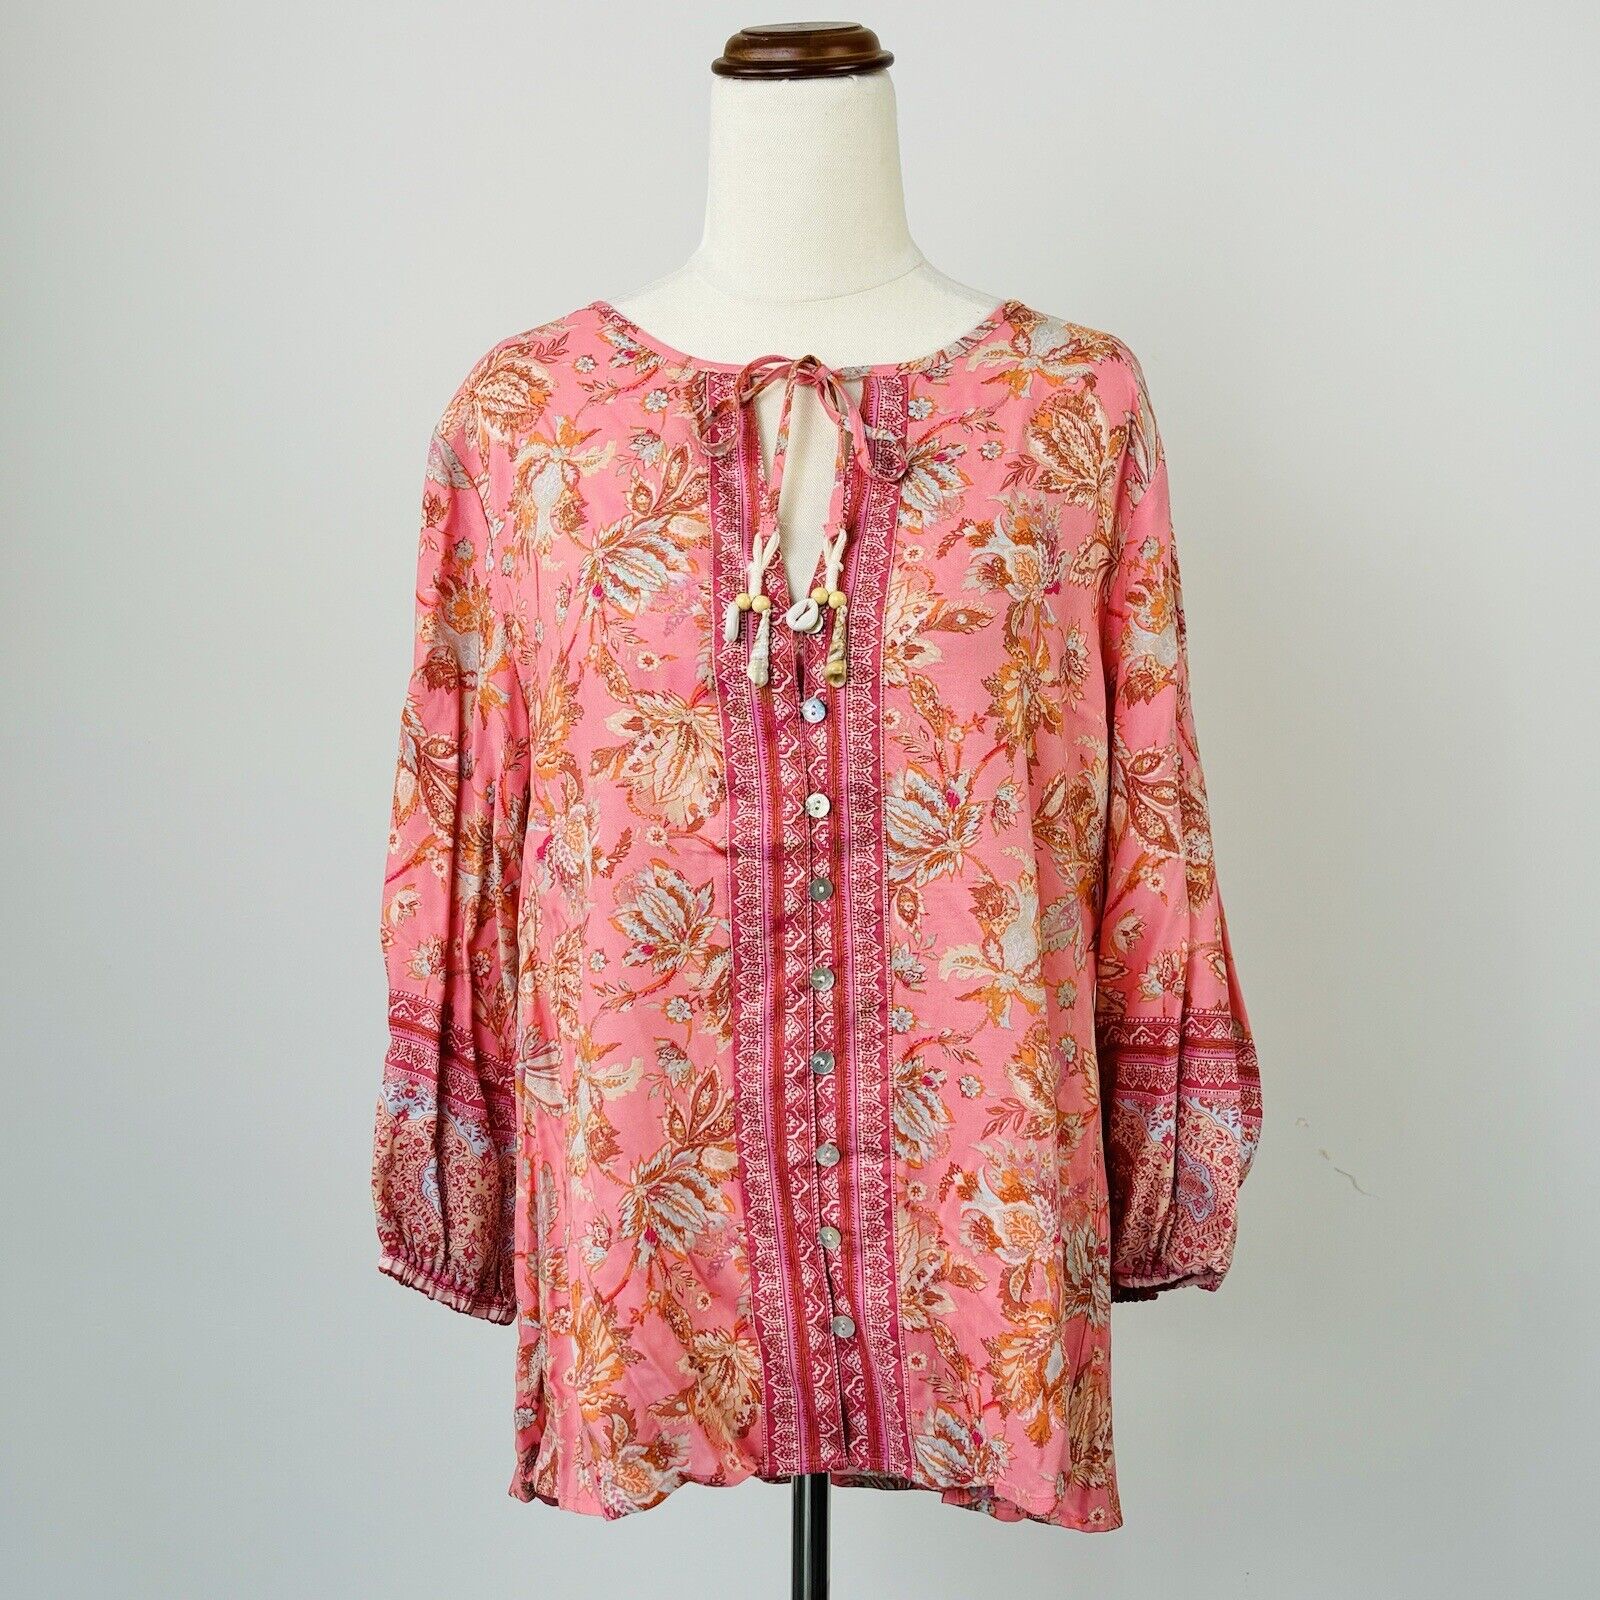 Iris Maxi Womens Top Blouse Floral Boho Oversize Pink Long Sleeve Size 16 NWT